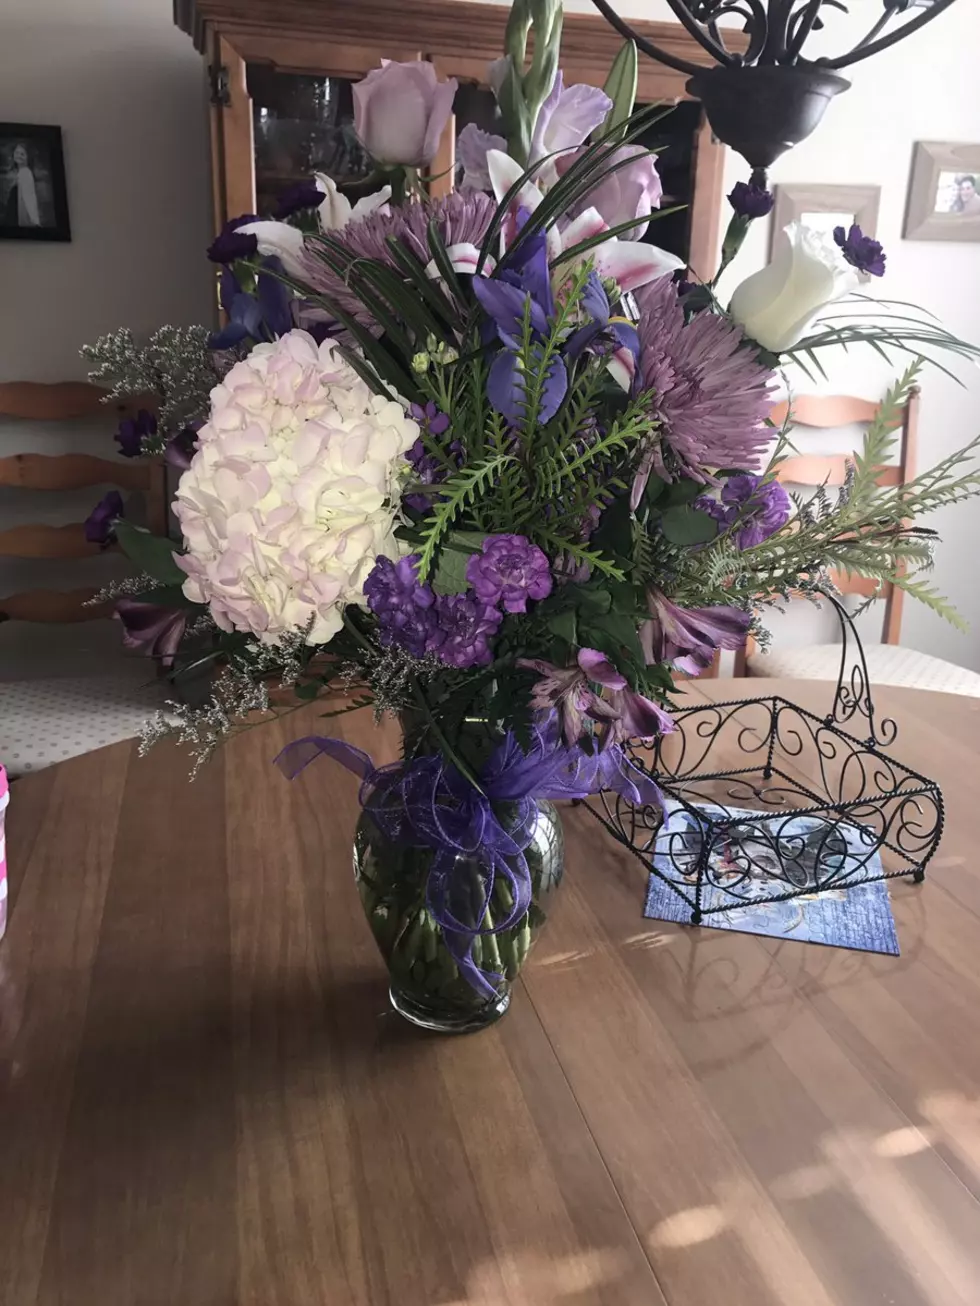 Deceased Father Sends Flowers to His Daughter Every Birthday